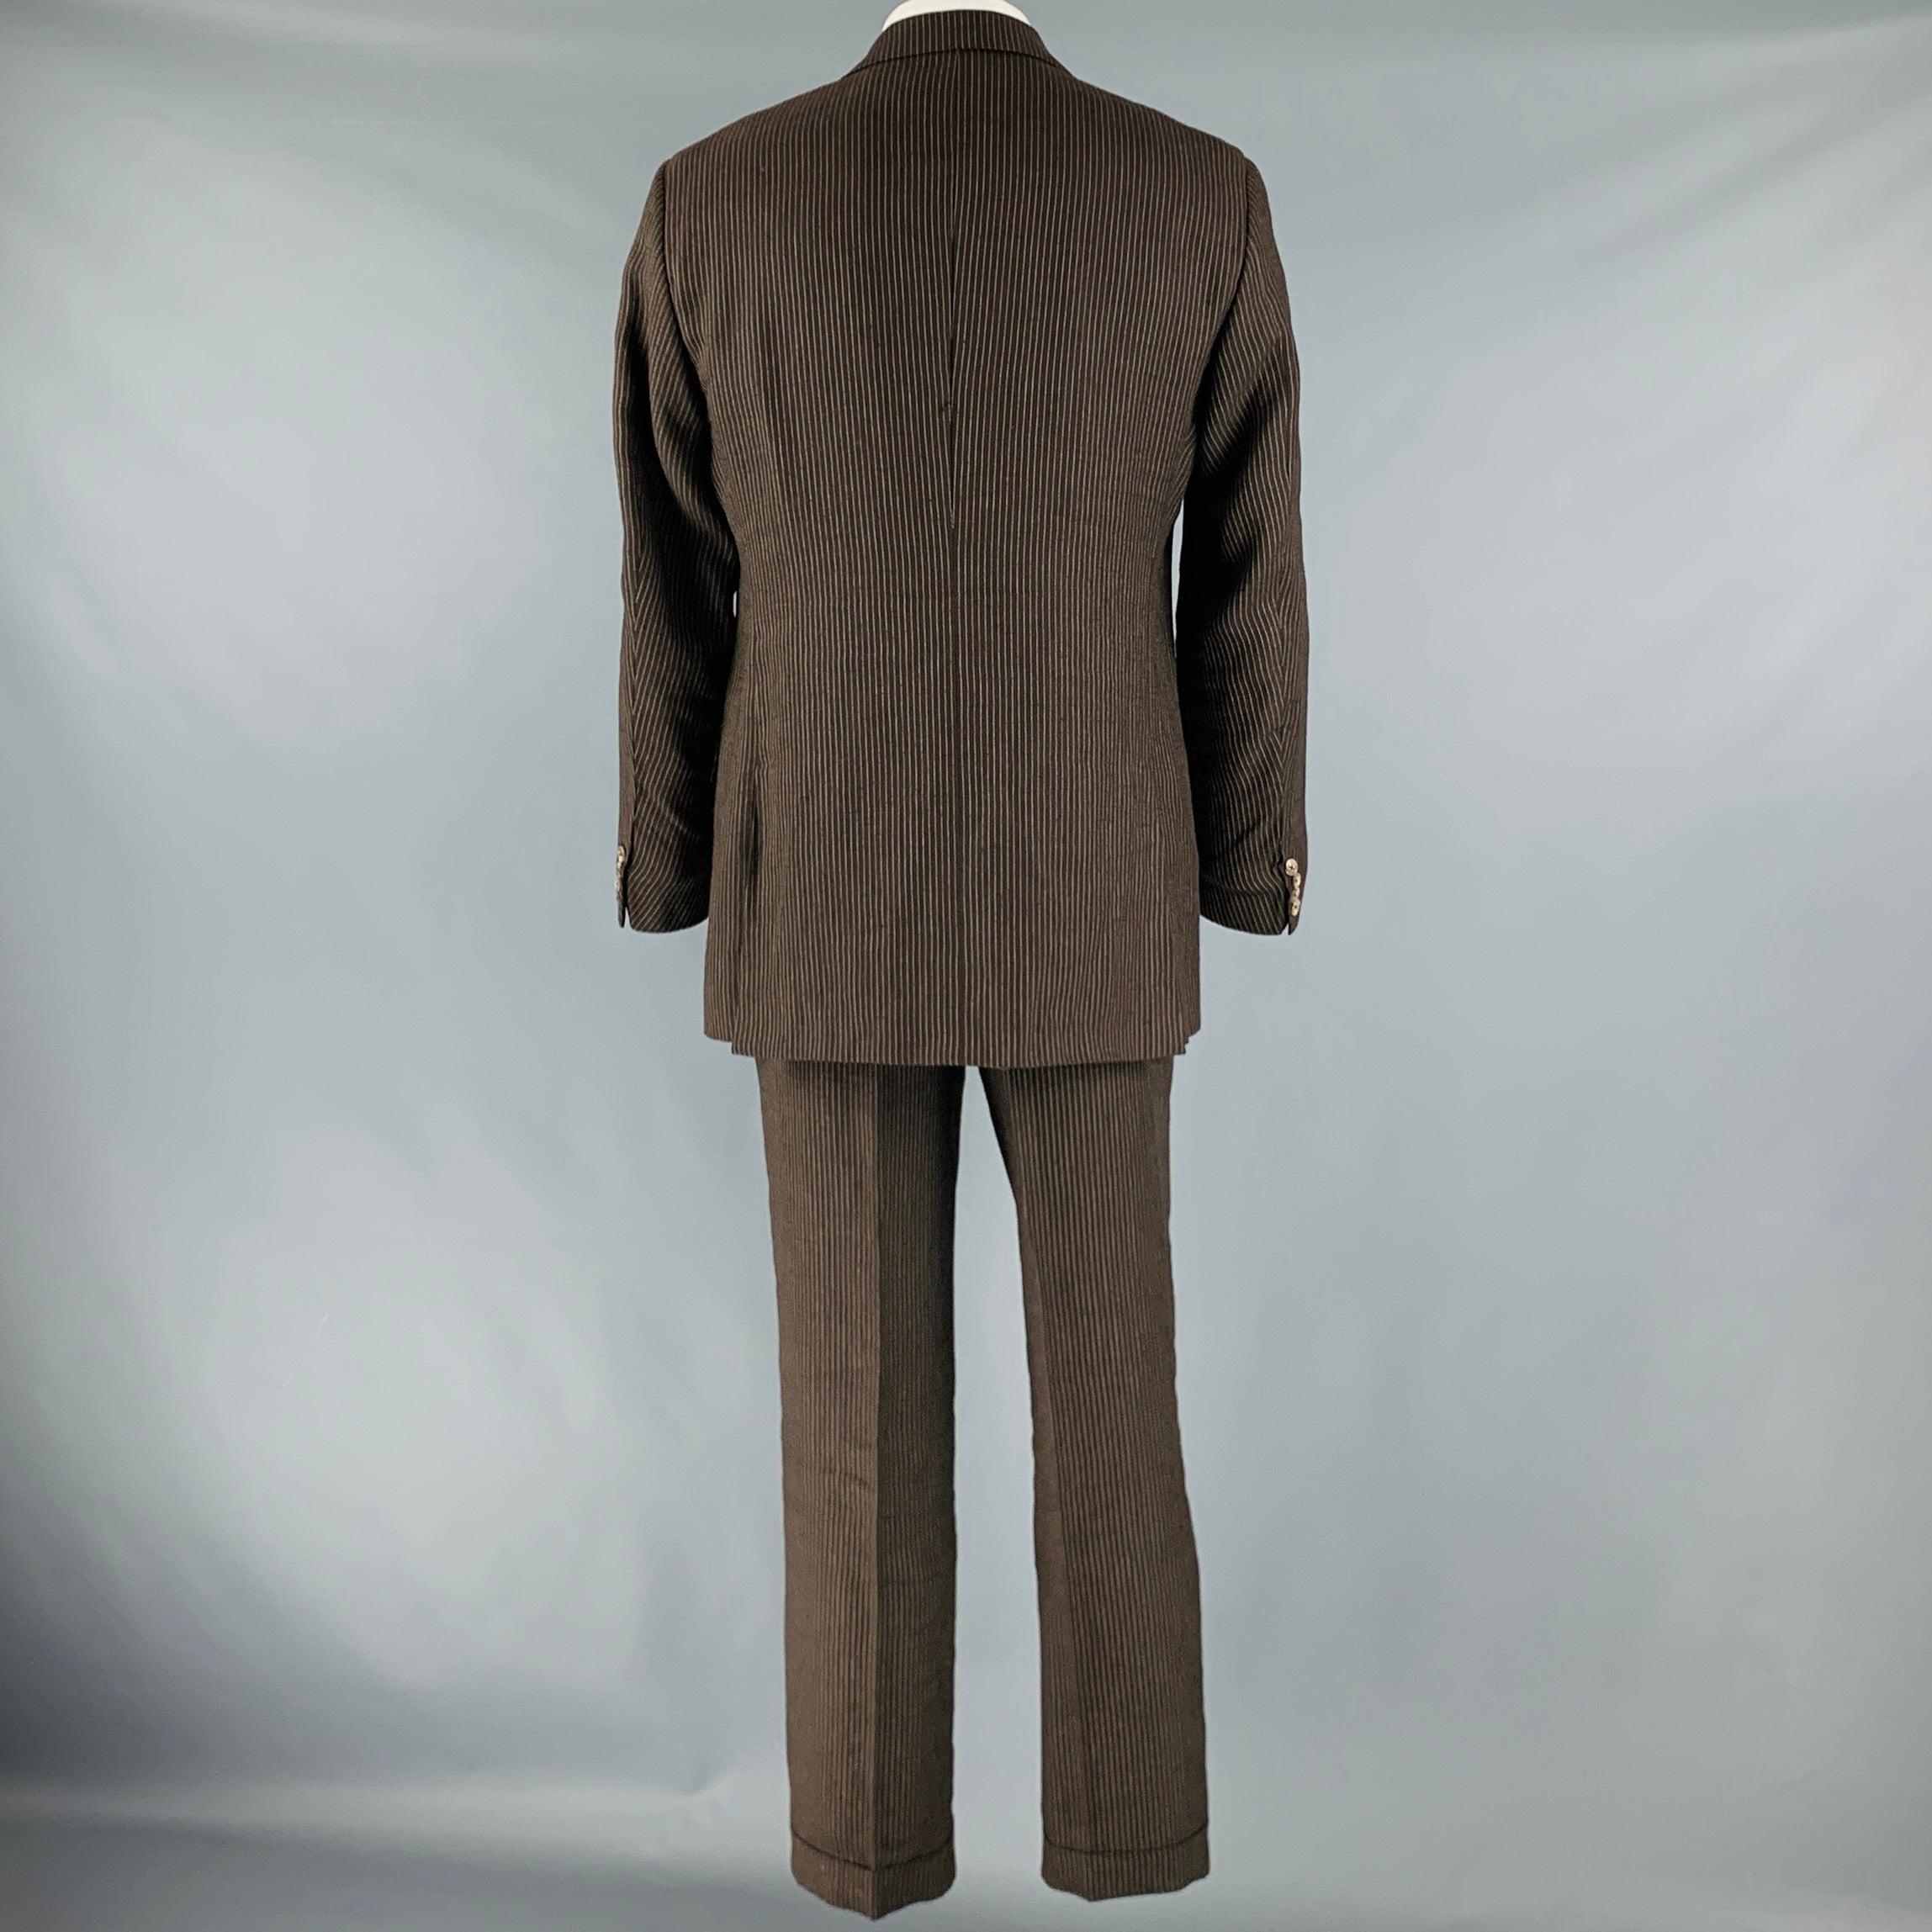 RALPH LAUREN Size 42 Long Brown Stripe Wool Notch Lapel Suit In Good Condition For Sale In San Francisco, CA